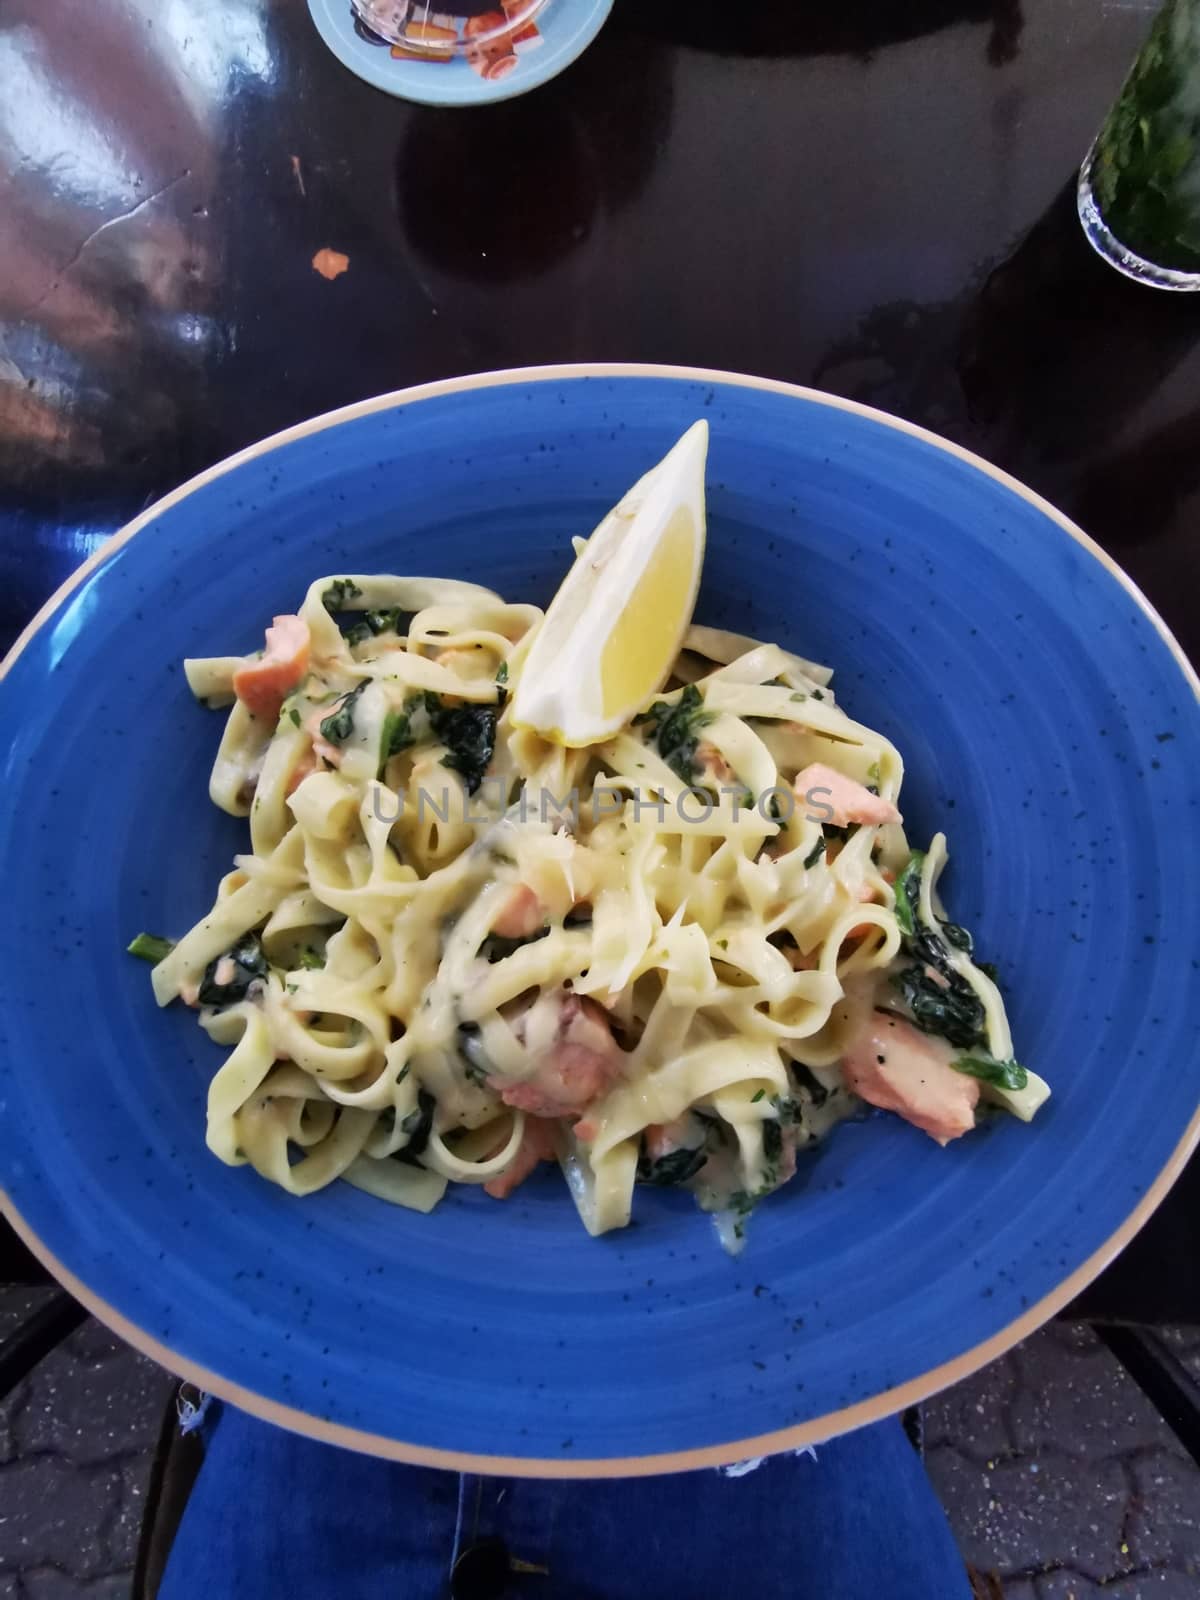 A bowl of pasta salad on a blue plate. High quality photo